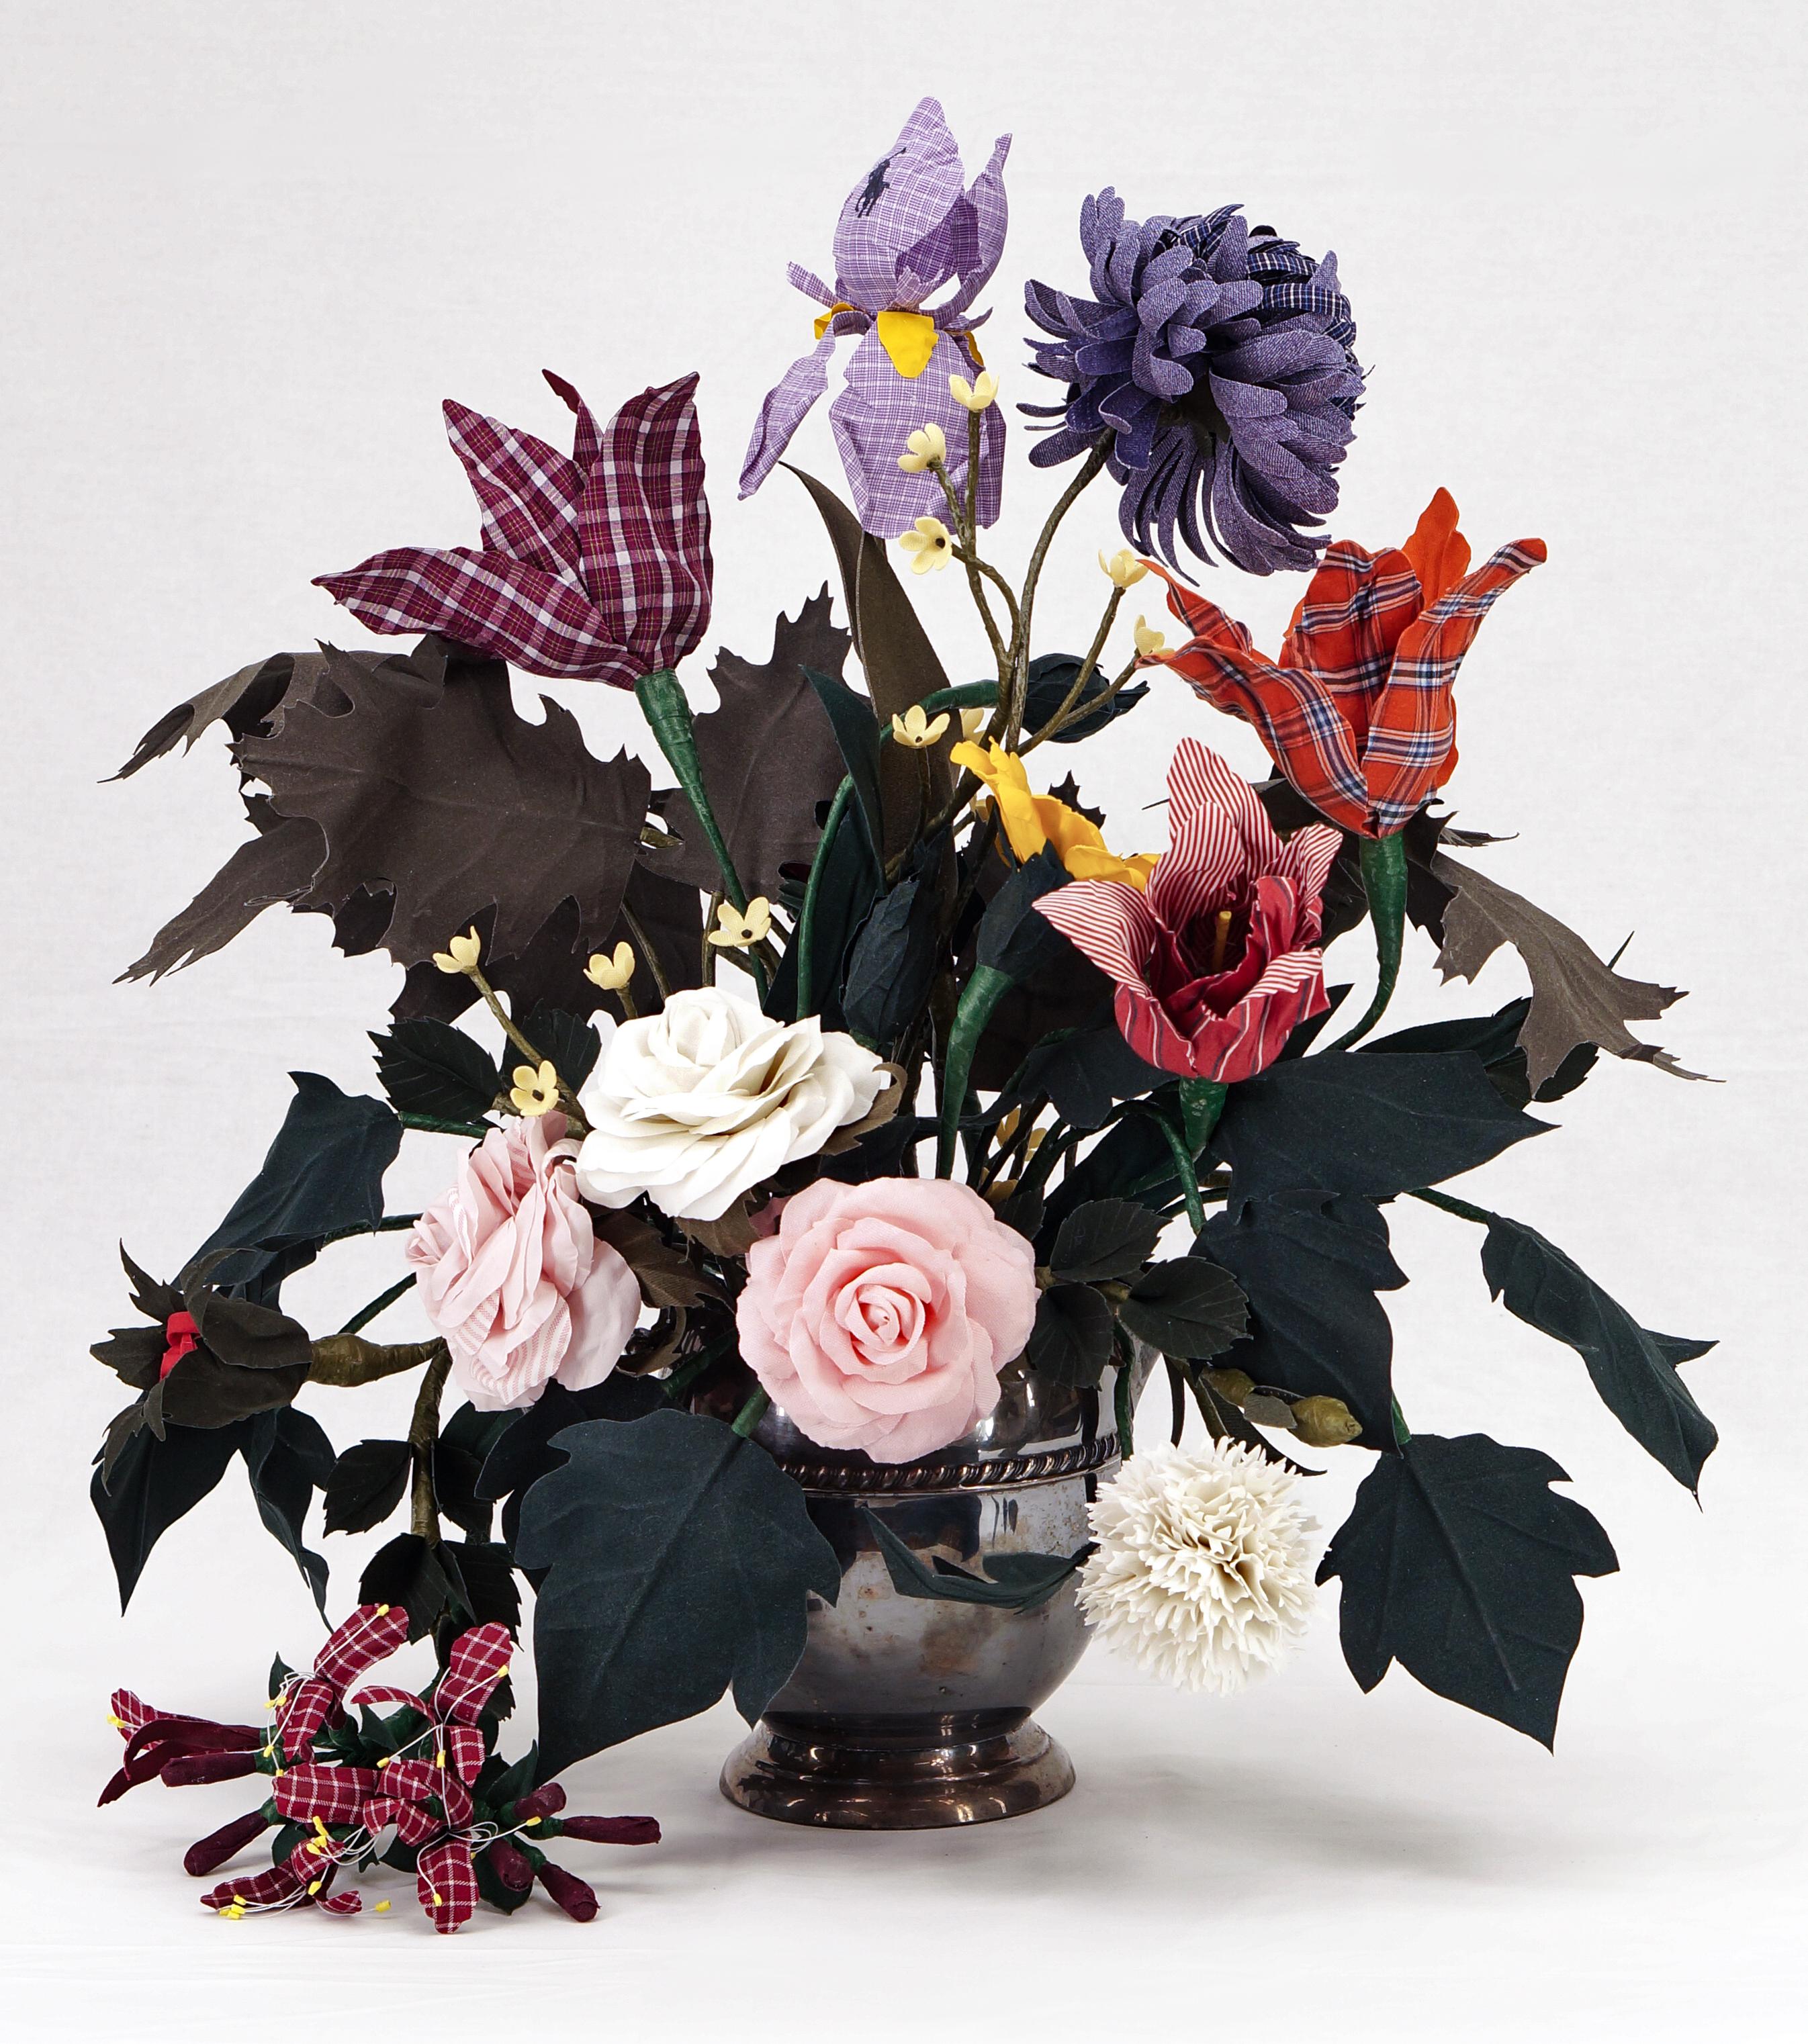 Vase with Roses, Honeysuckle, and Pheasant's Eye - Sculpture by Carlton Scott Sturgill